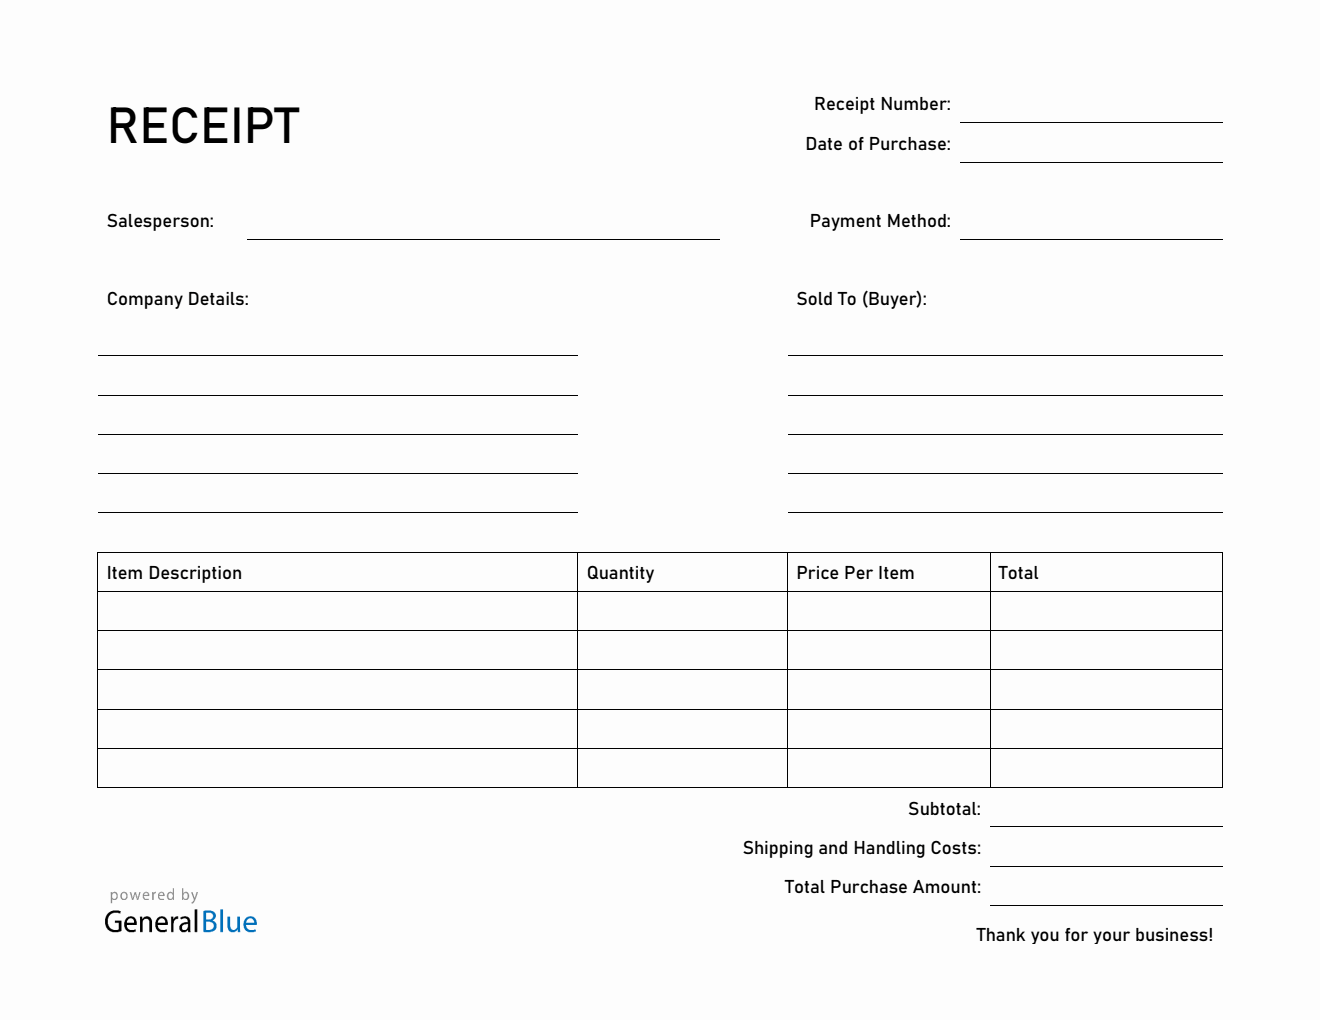 Basic Receipt Template in Word